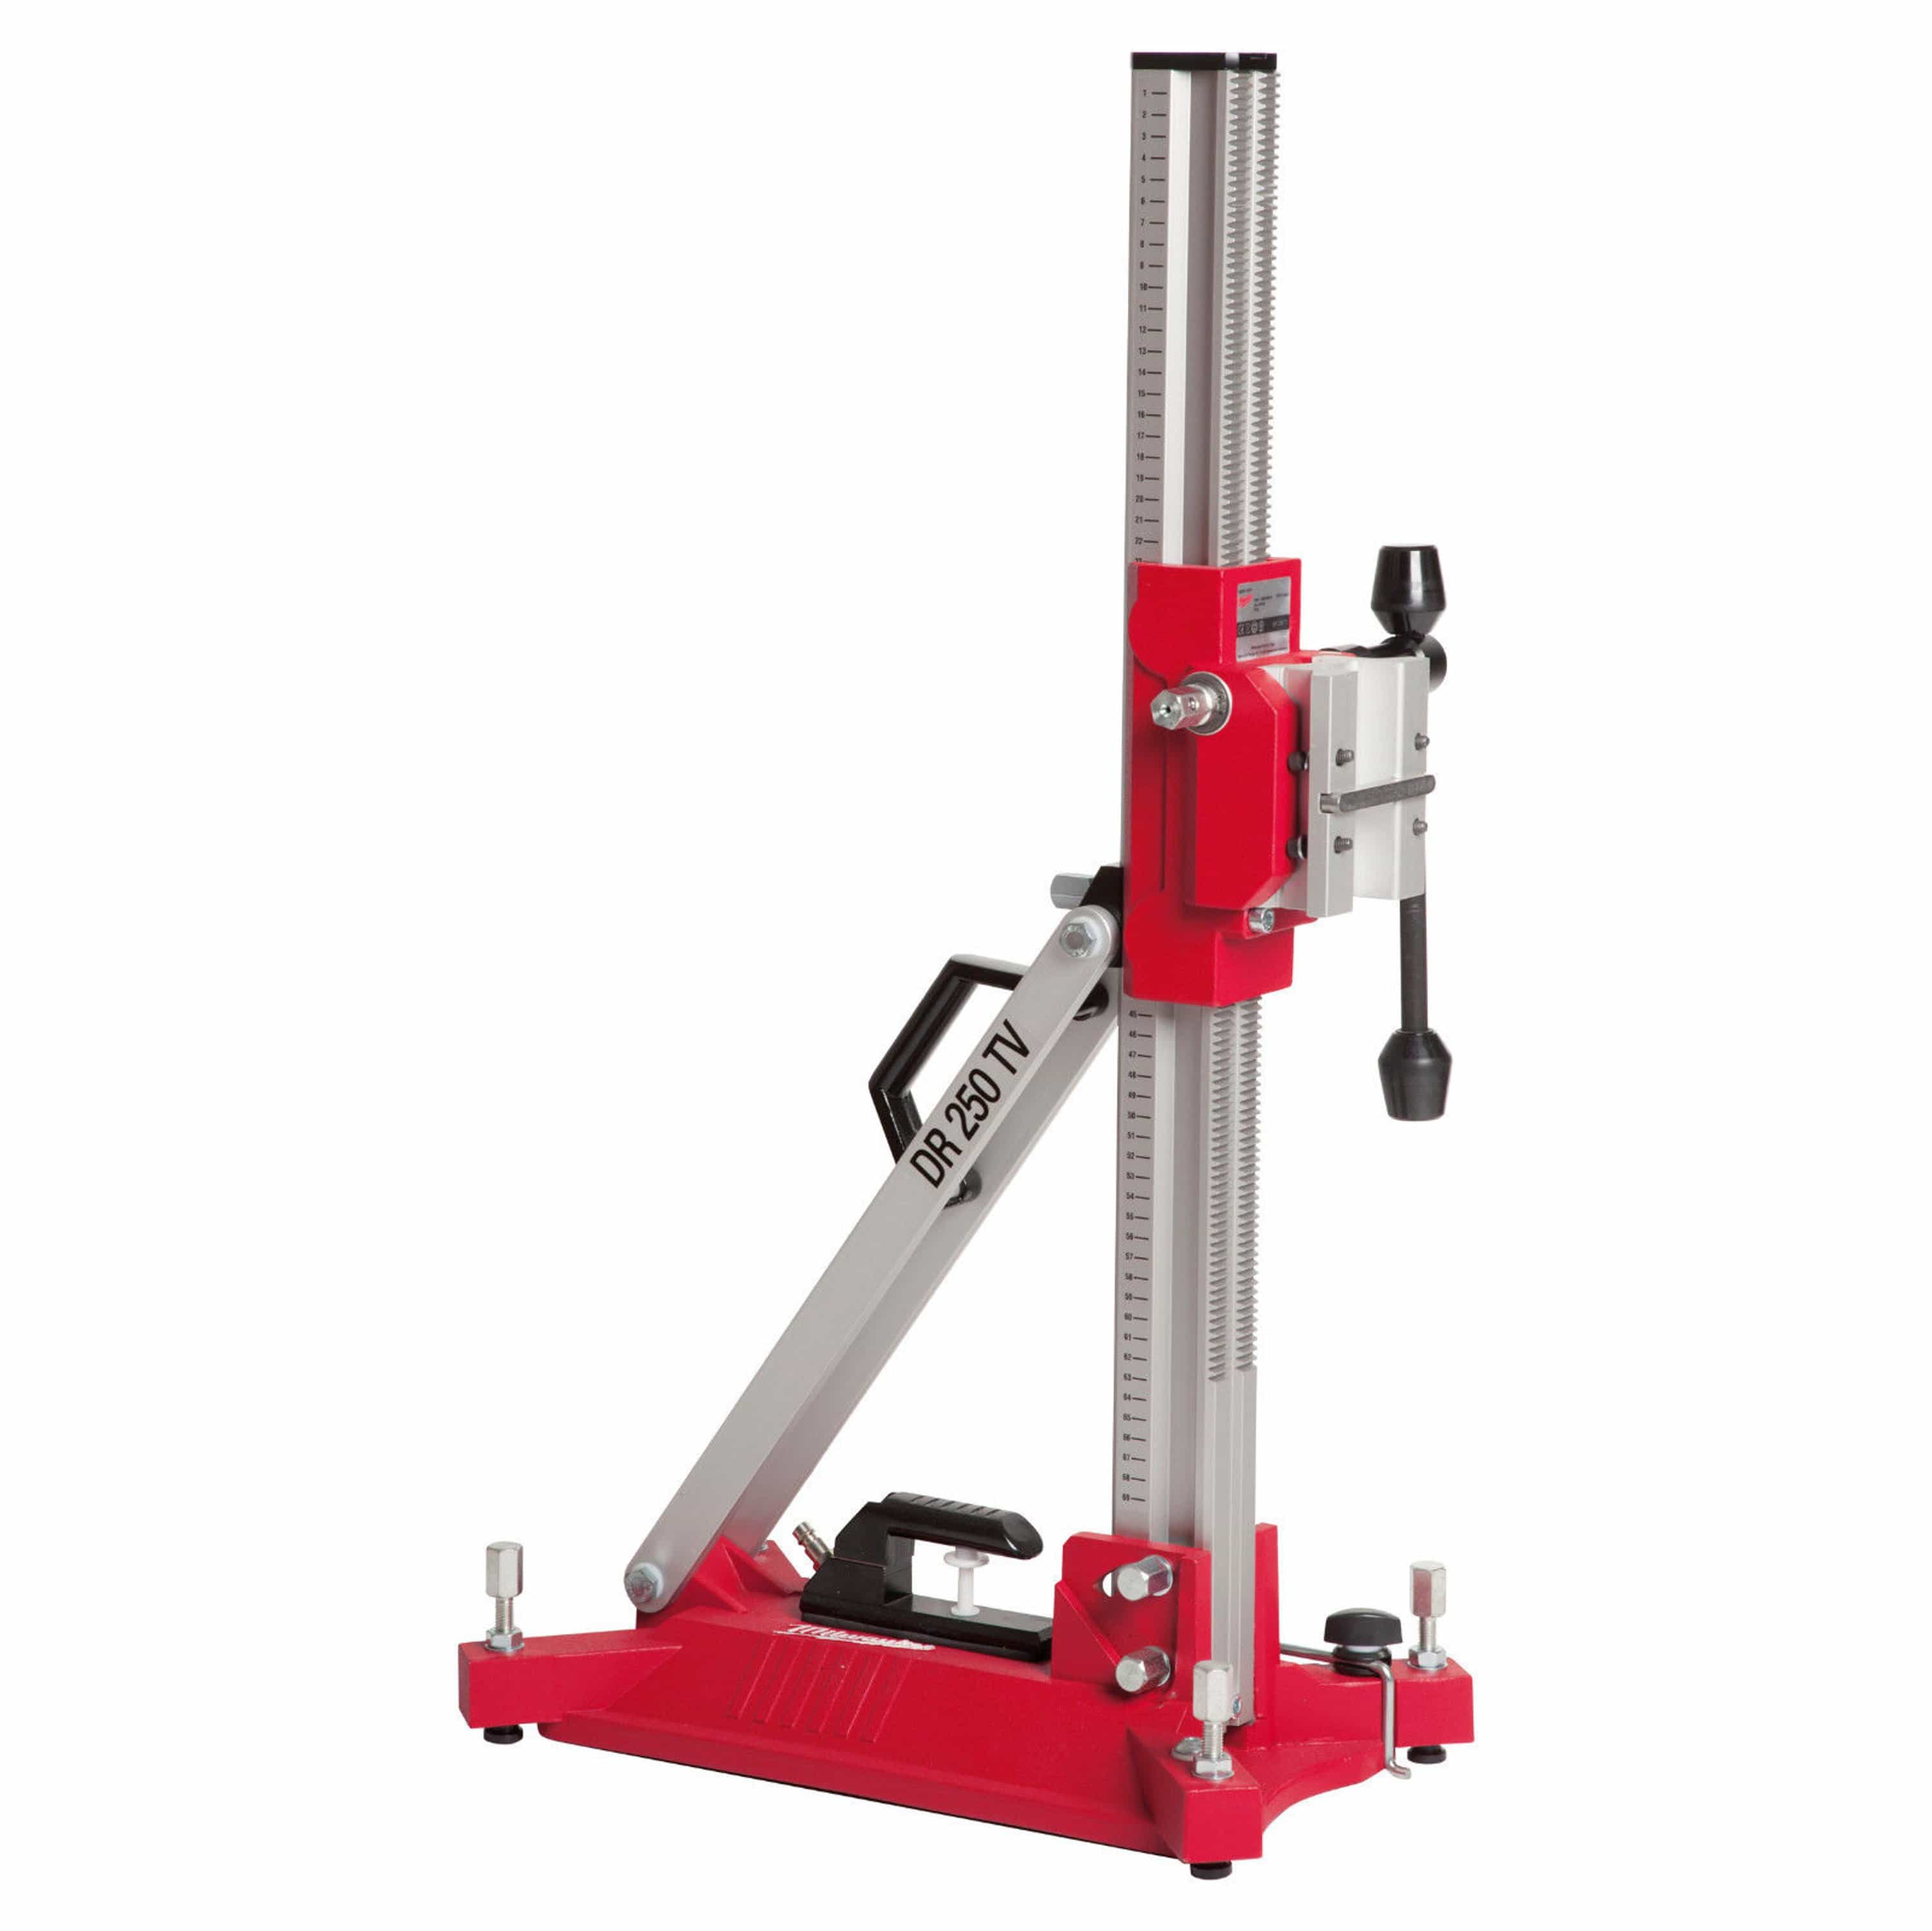 Milwaukee Diamond Drill Stand For DCM 2-250 C - DR 250 TV | Accra, Ghana Tools Building Steel Engineering Hardware tool